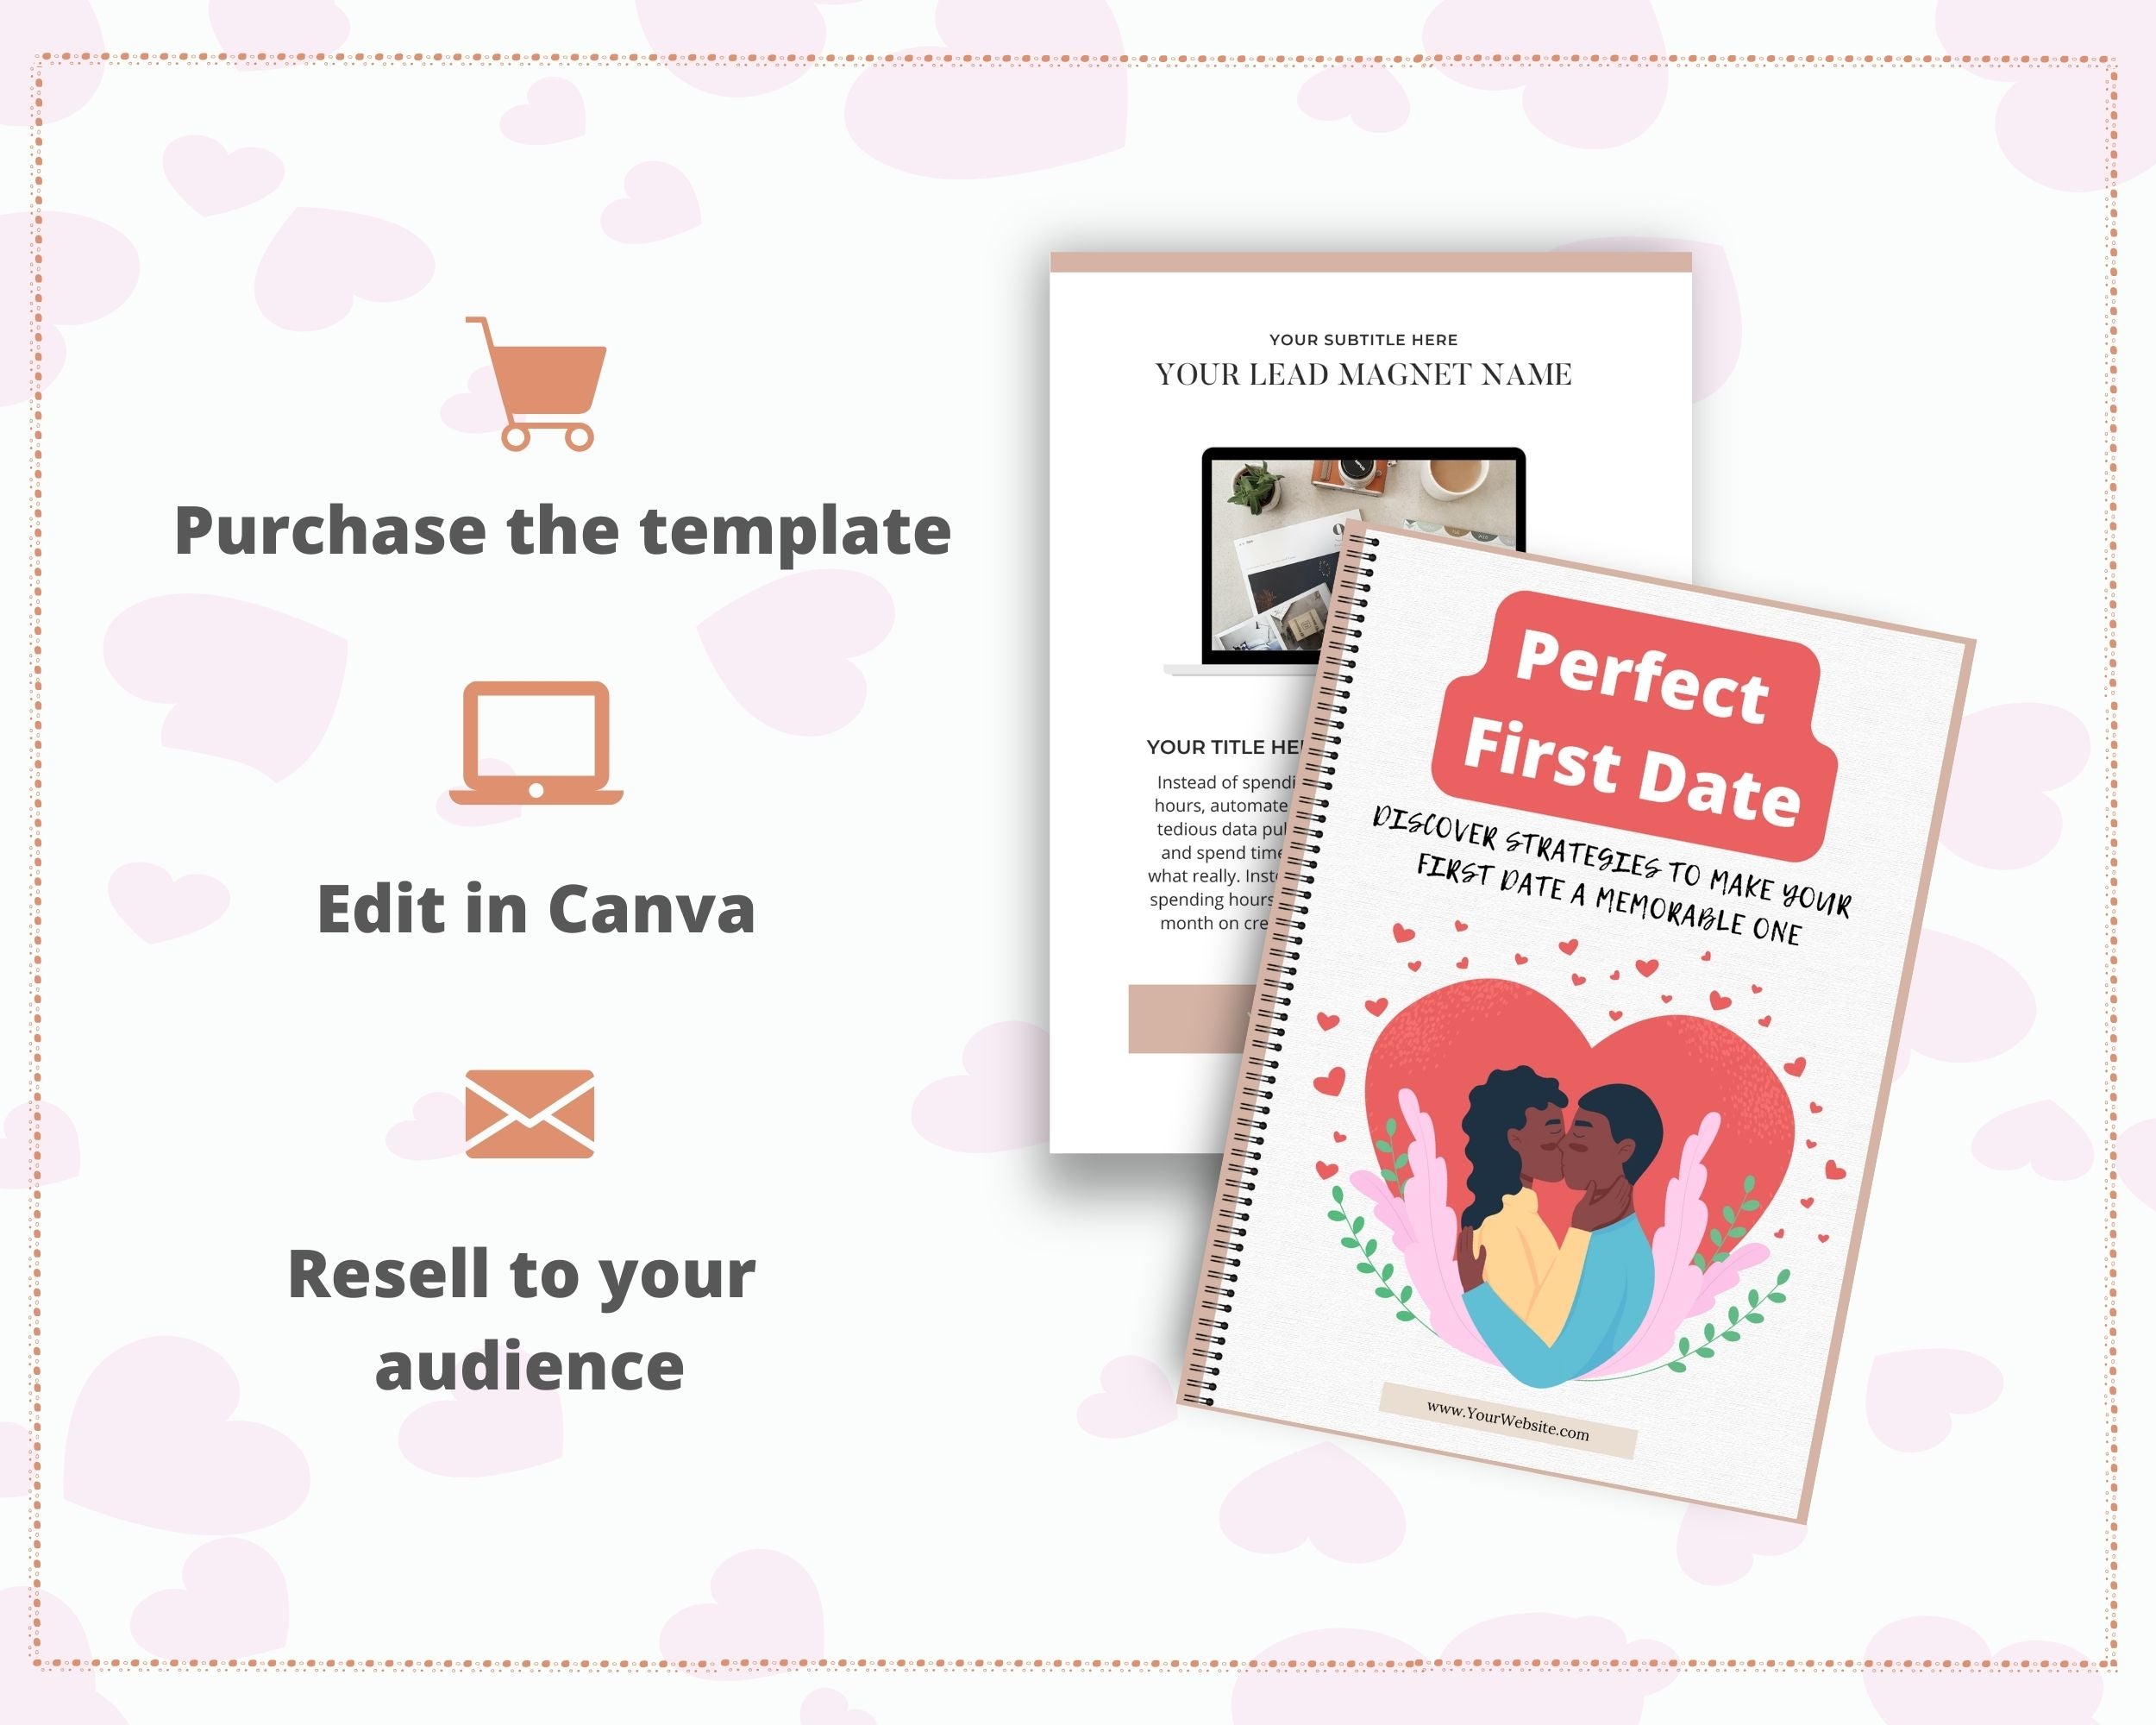 Editable Perfect First Date Ebook | Done-for-You Ebook in Canva | Rebrandable and Resizable Canva Template